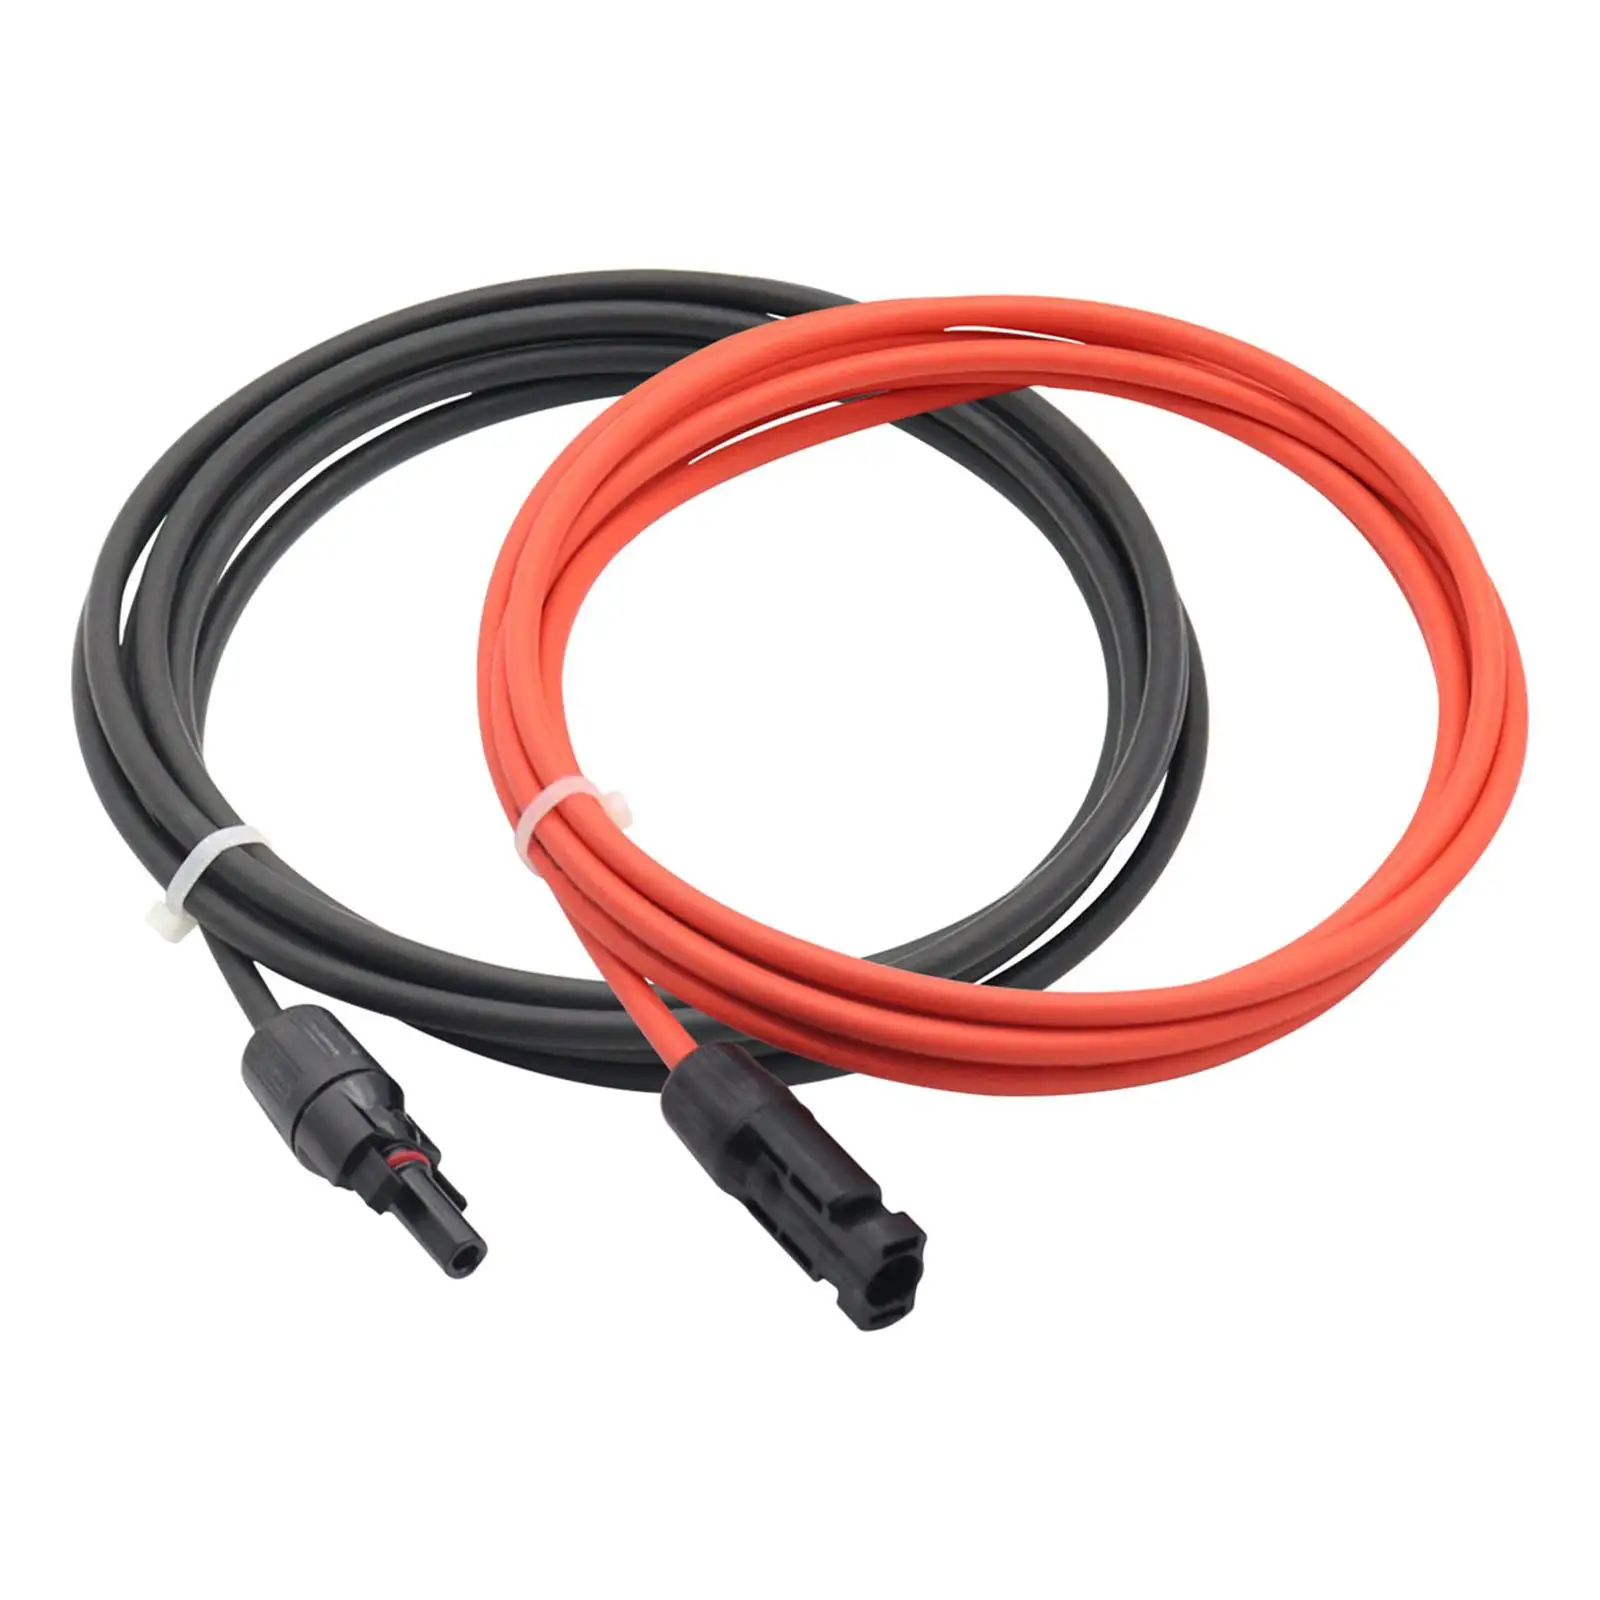 10 ft Solar Extension Cable, 12 AWG Heavy Duty with Female and Male Connectors for Hiking Solar Panel Yachts Black Red